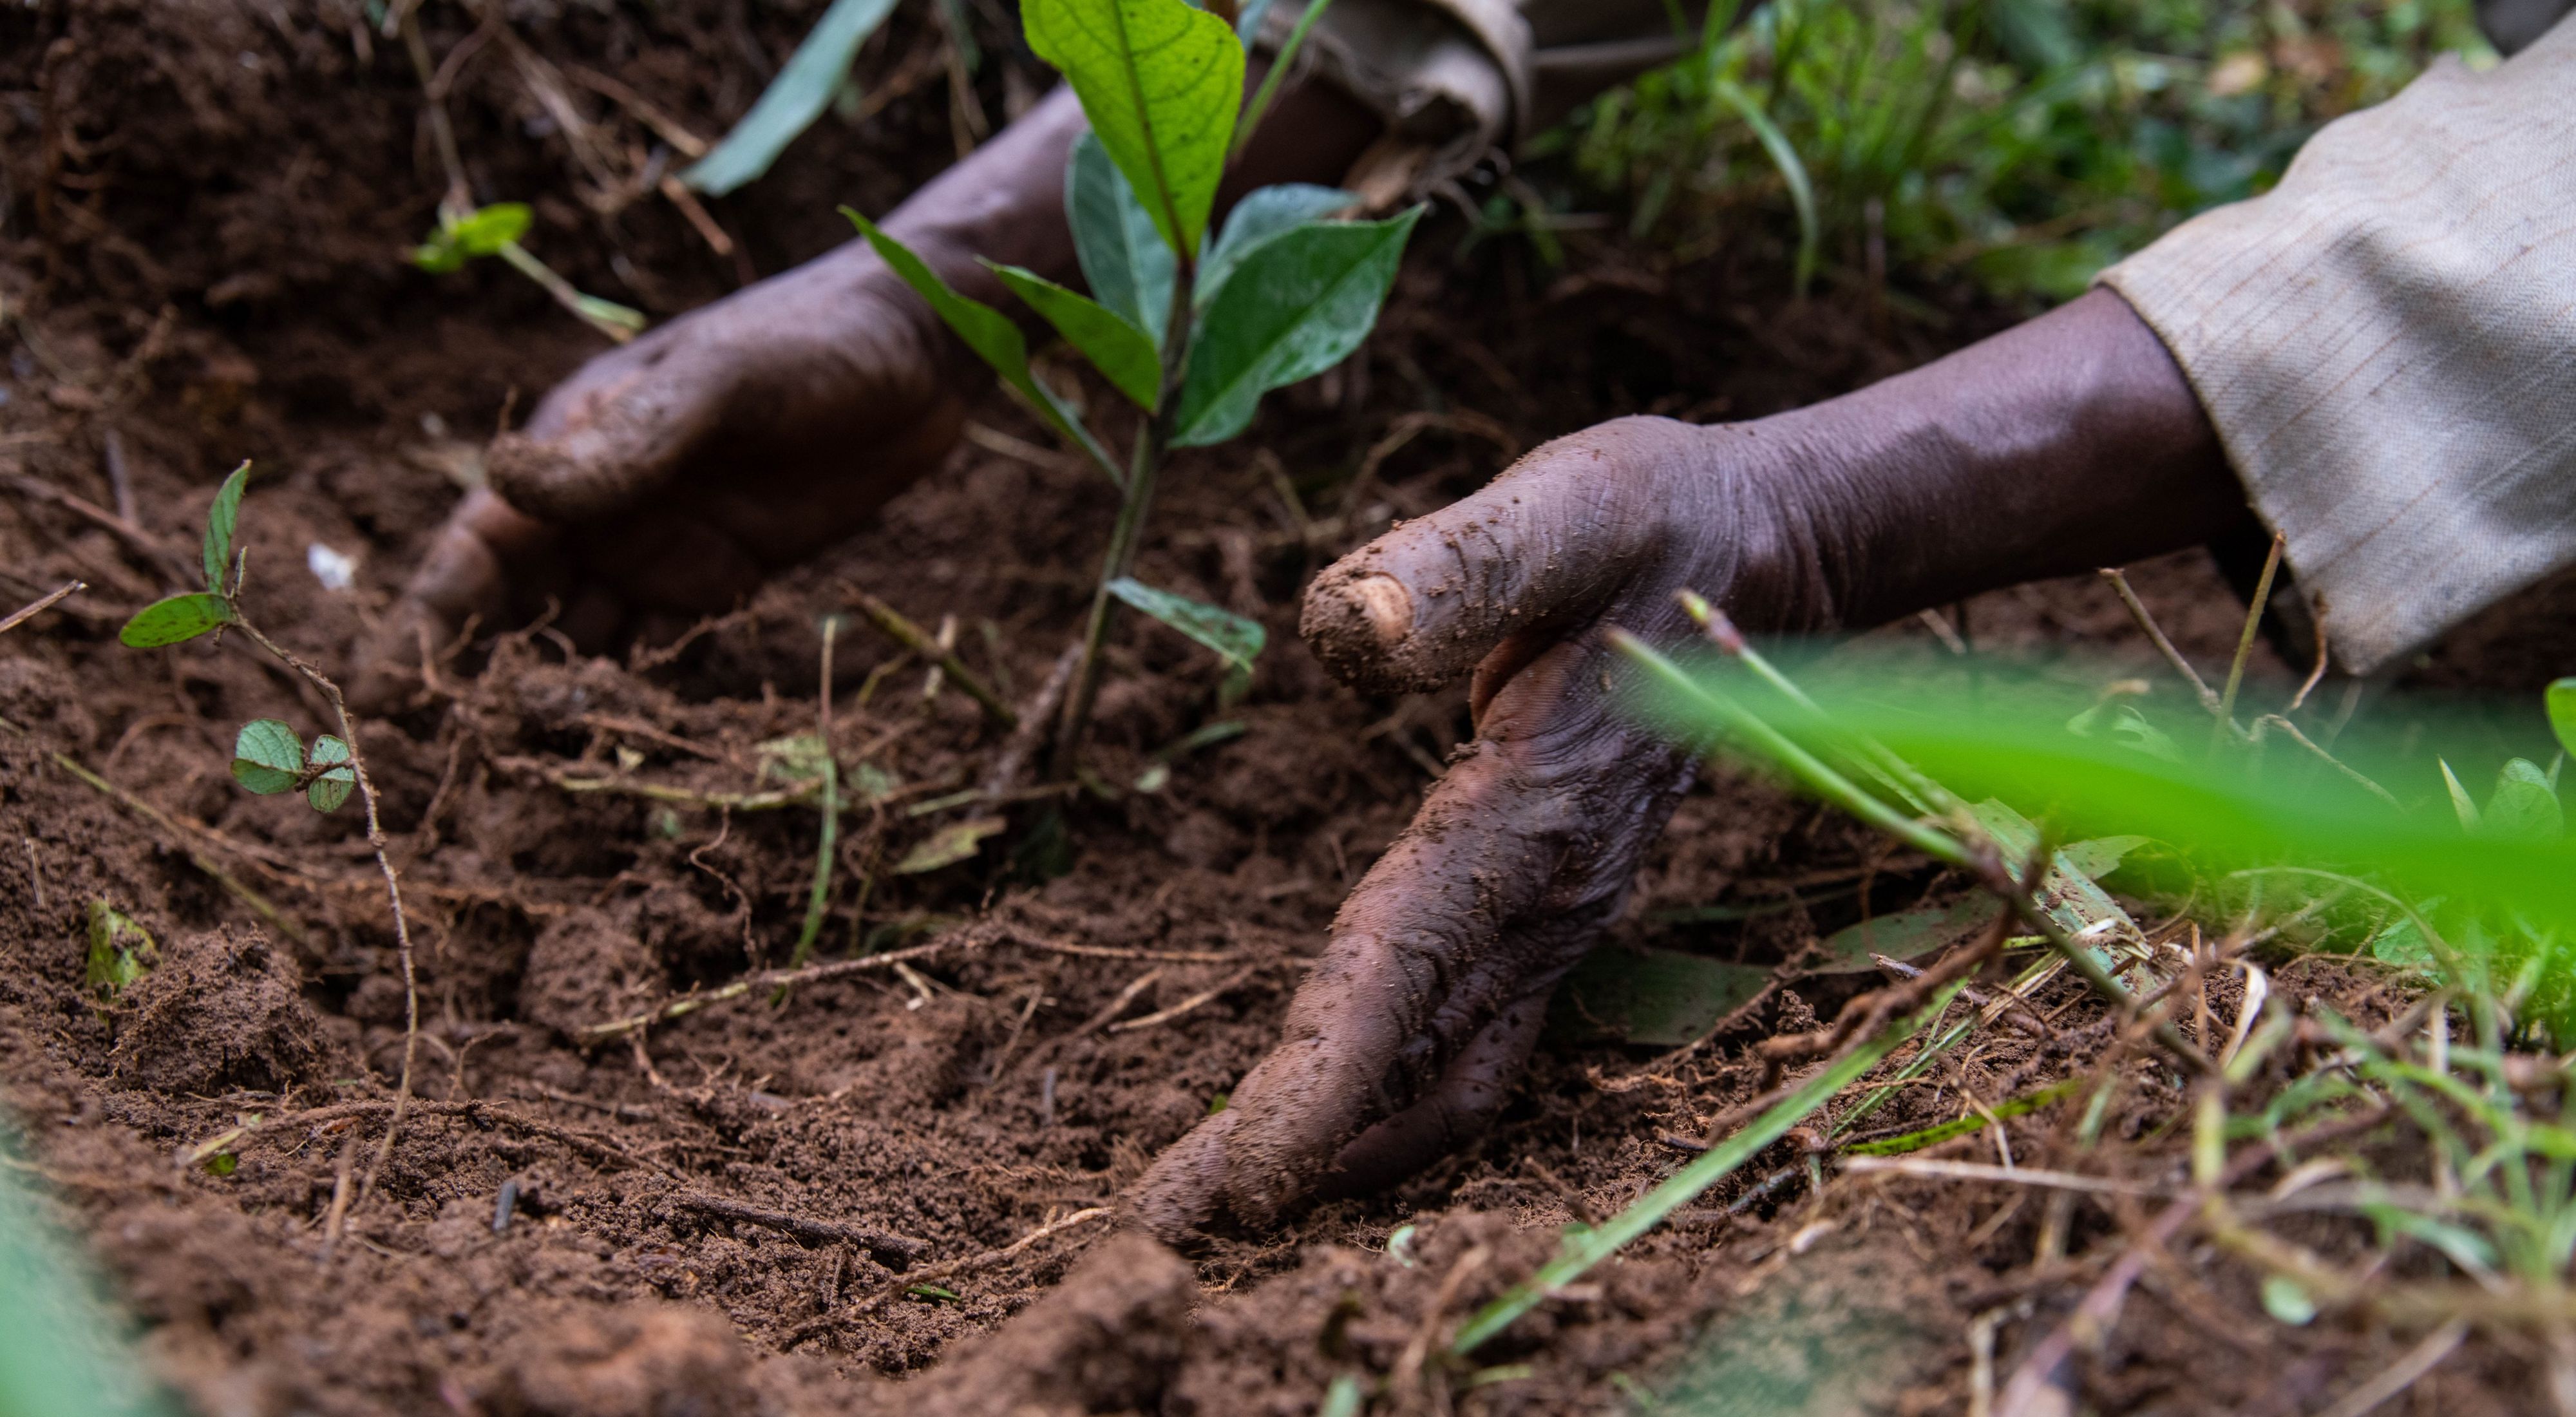 closeup of hands in soil planting a tree